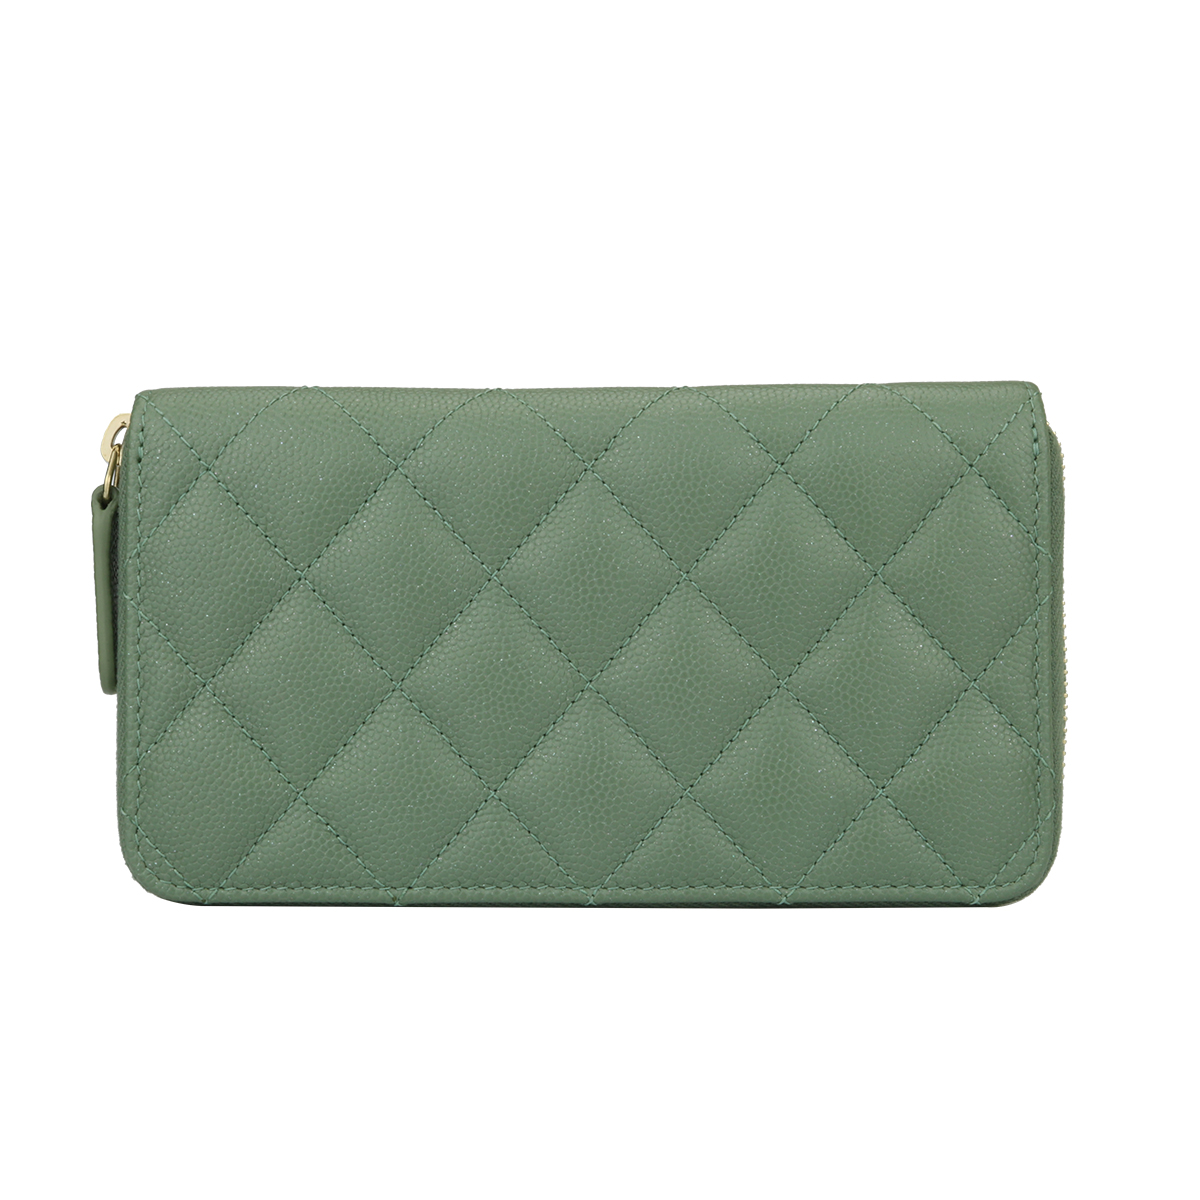 Metallic Green Quilted Caviar Classic Zip Card Case Pale Gold Hardware, 2018